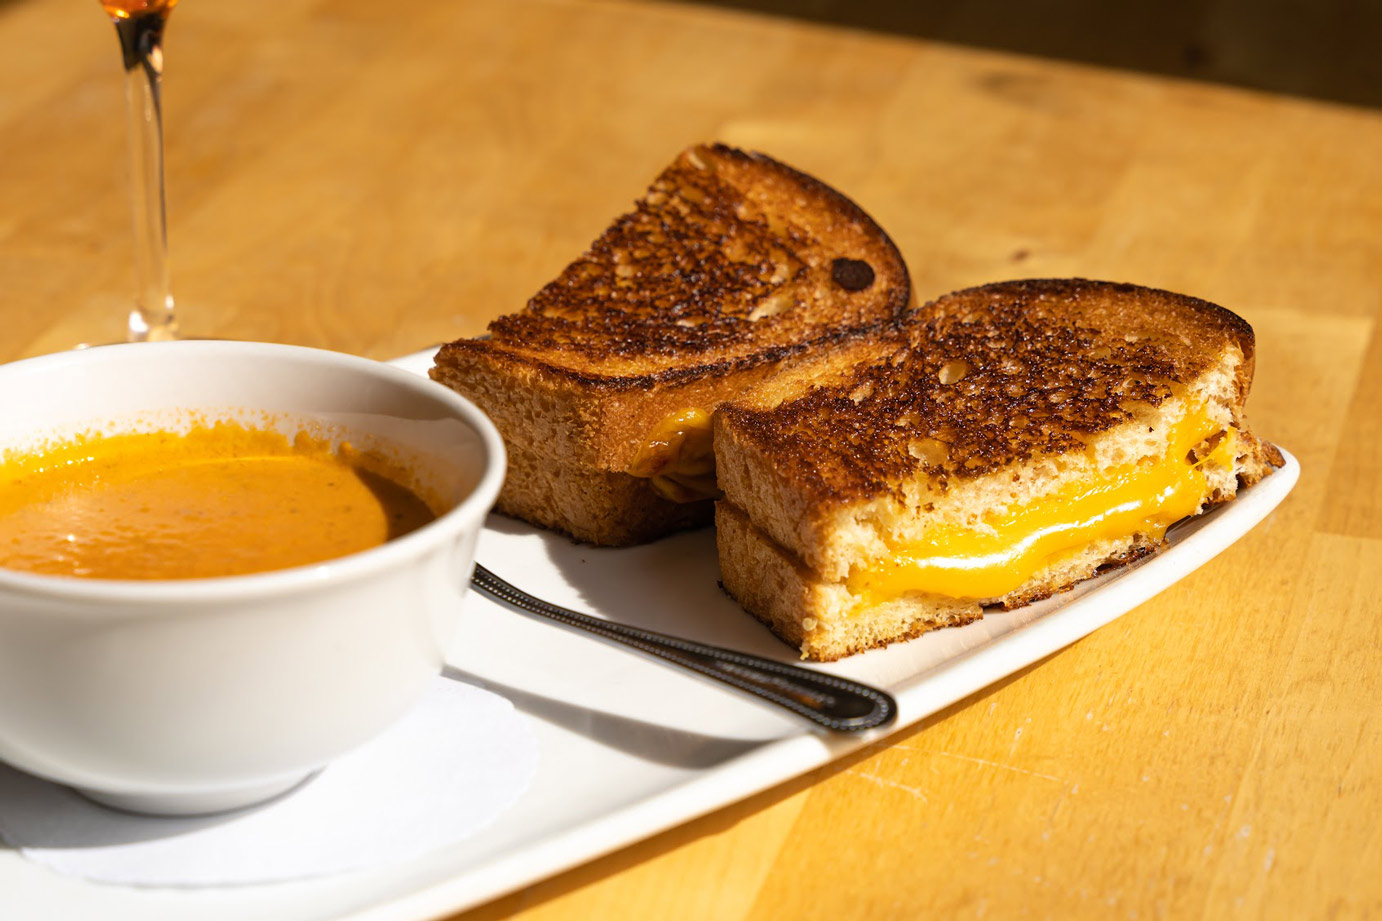 Grilled cheese sandwich with a soup on the side